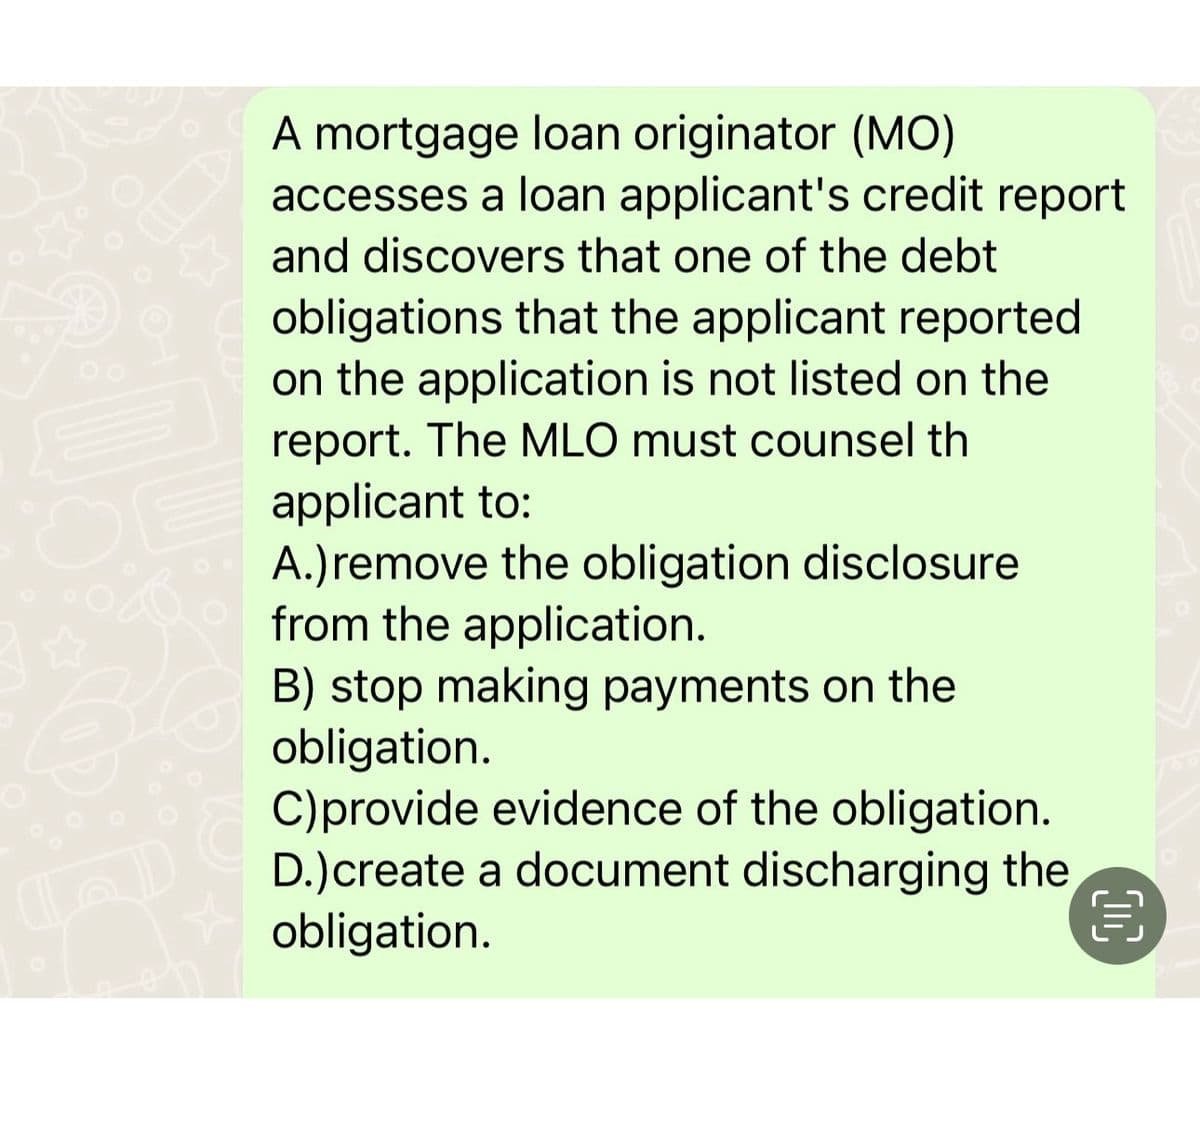 OE
B
A mortgage loan originator (MO)
accesses a loan applicant's credit report
and discovers that one of the debt
obligations that the applicant reported
on the application is not listed on the
report. The MLO must counsel th
applicant to:
A.) remove the obligation disclosure
from the application.
B) stop making payments on the
obligation.
C) provide evidence of the obligation.
D.)create a document discharging the
obligation.
目